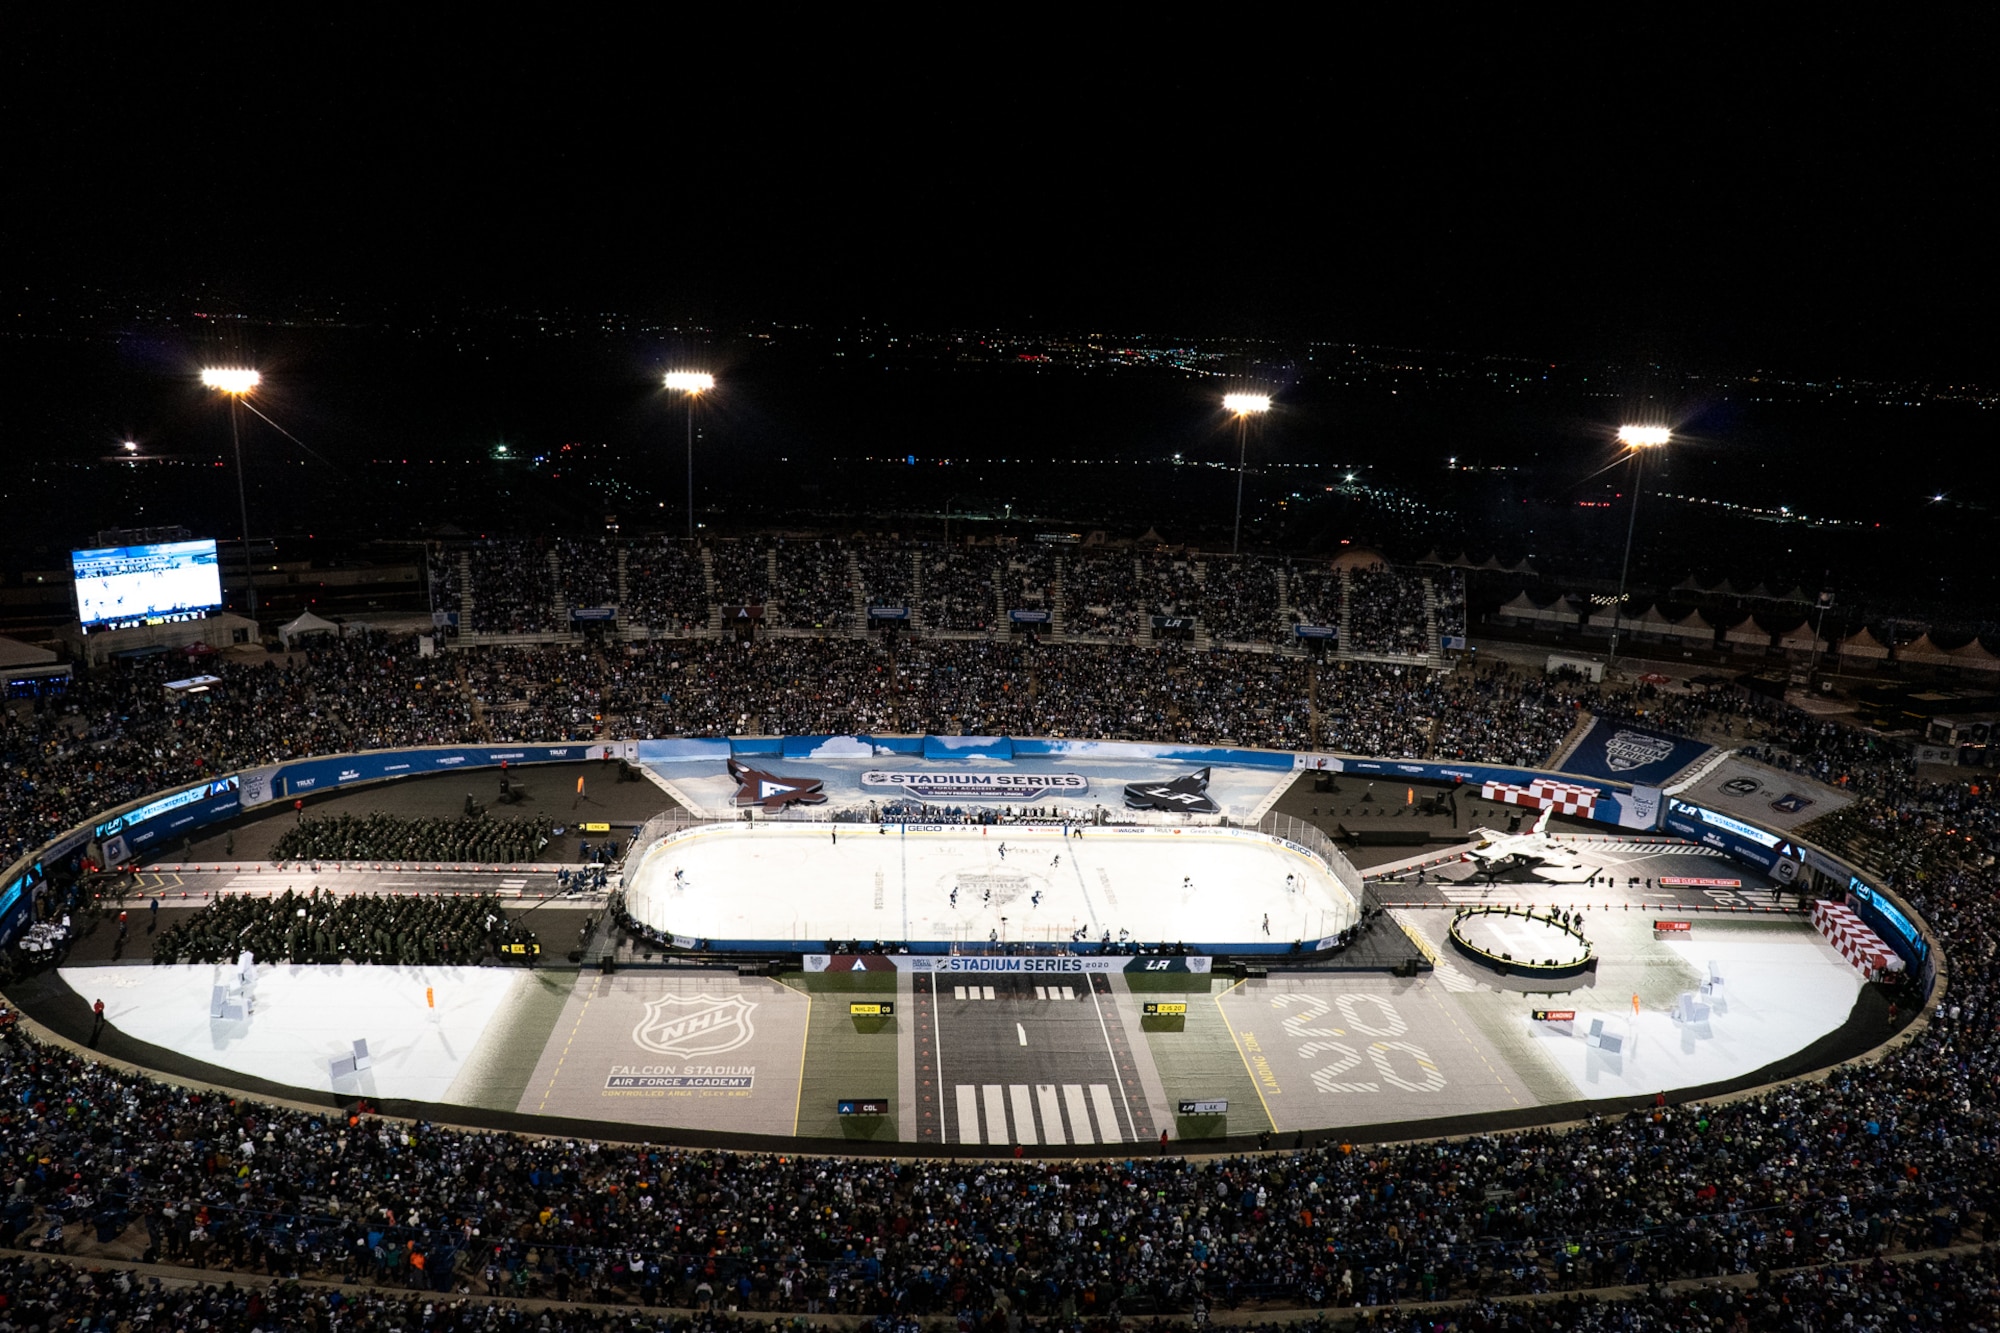 A near-capacity crowd takes their seats prior to the ceremonial puck drop during the NHL Stadium Series game Feb. 15, 2020, at the Air Force Academy, Colo. (Air Force photo)